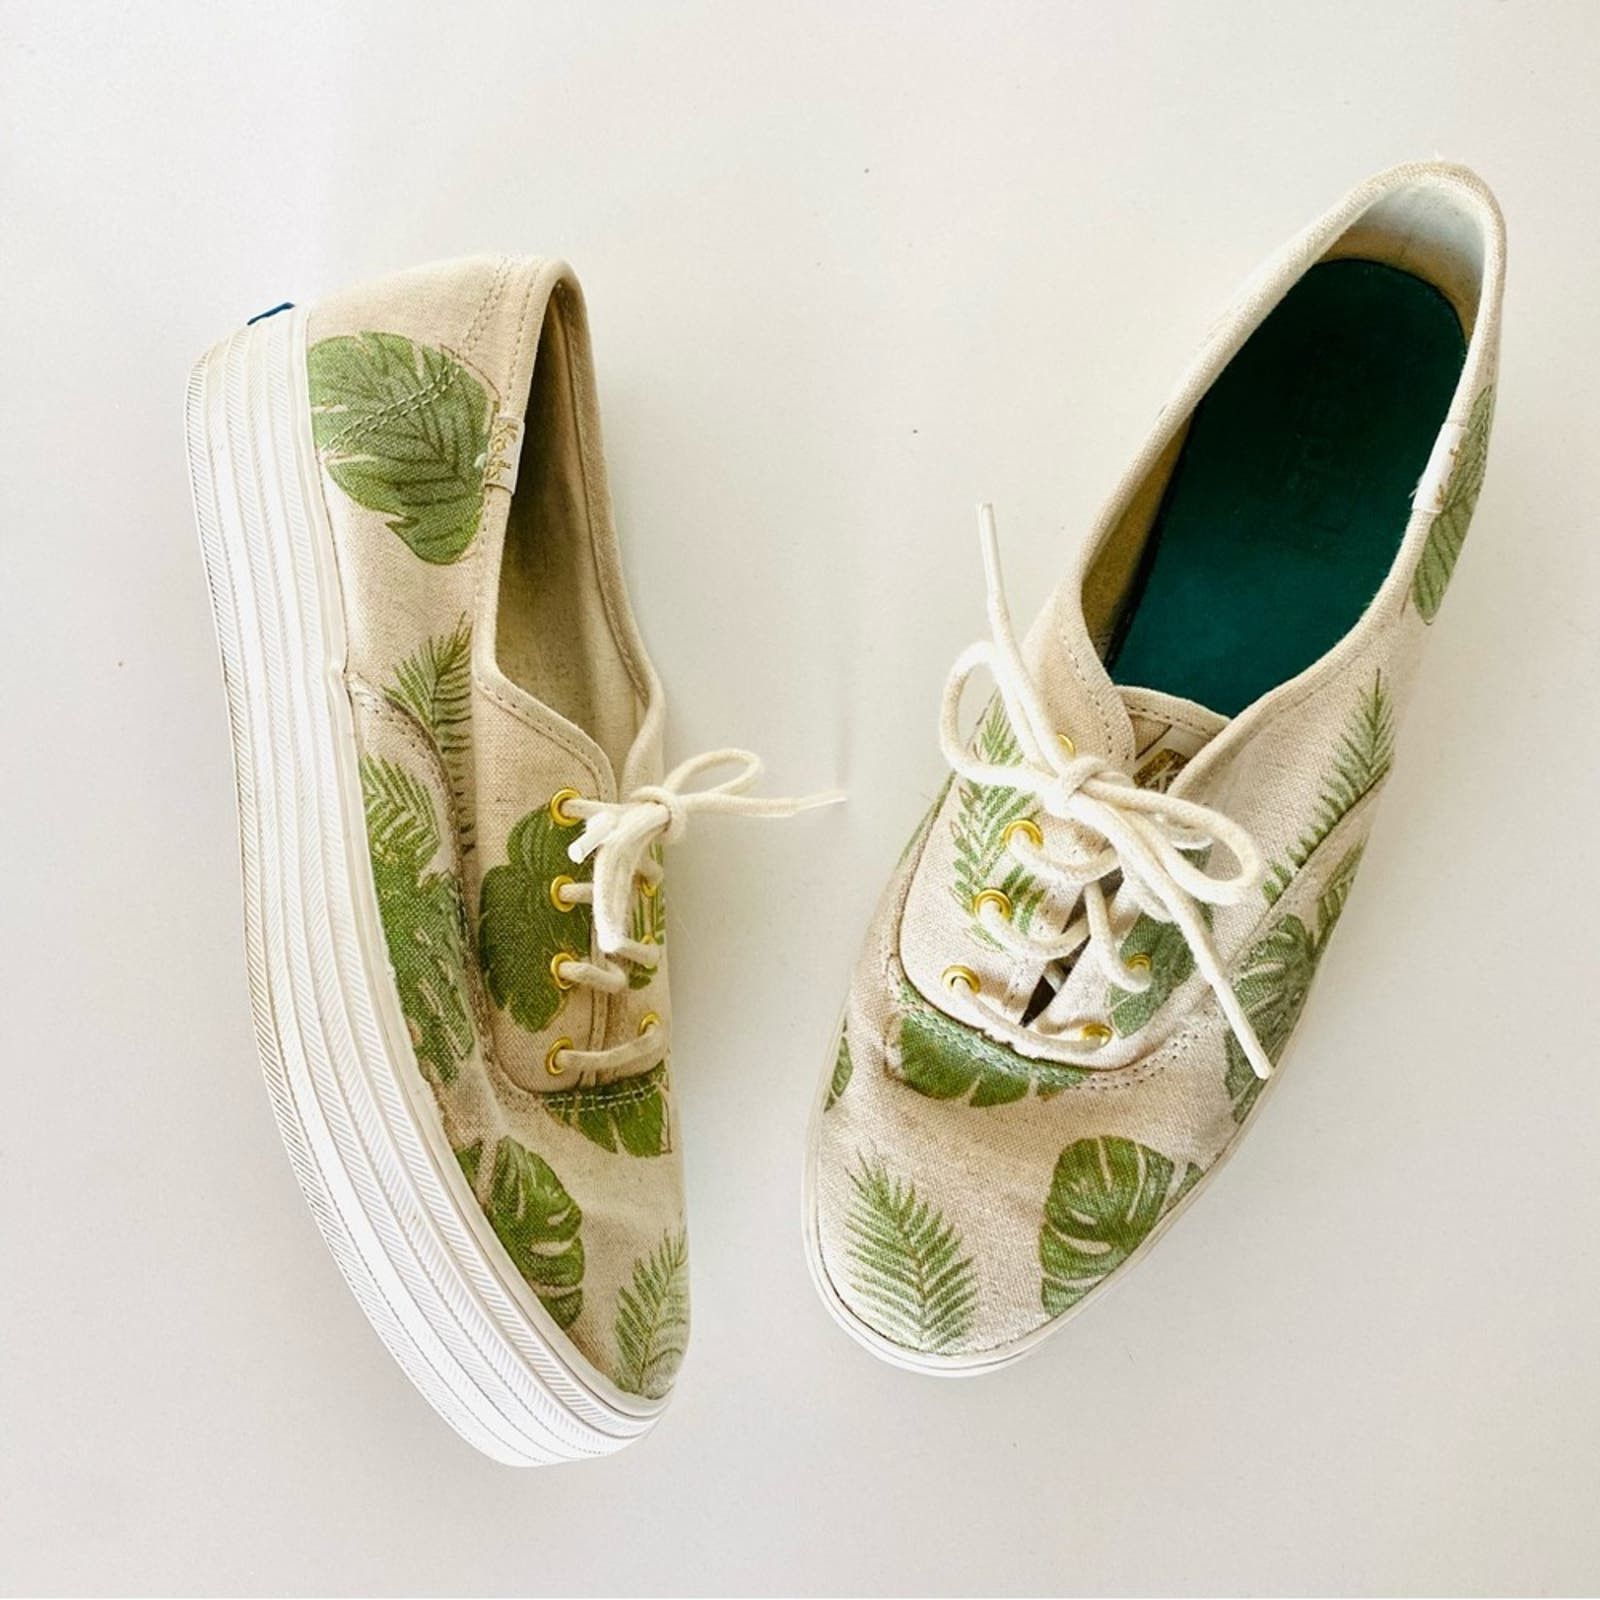 Anthropologie ANTHROPOLOGIE KEDS Cream Green Palm Leaf Platform Sneakers Size US 8.5 / IT 38.5 - 1 Preview